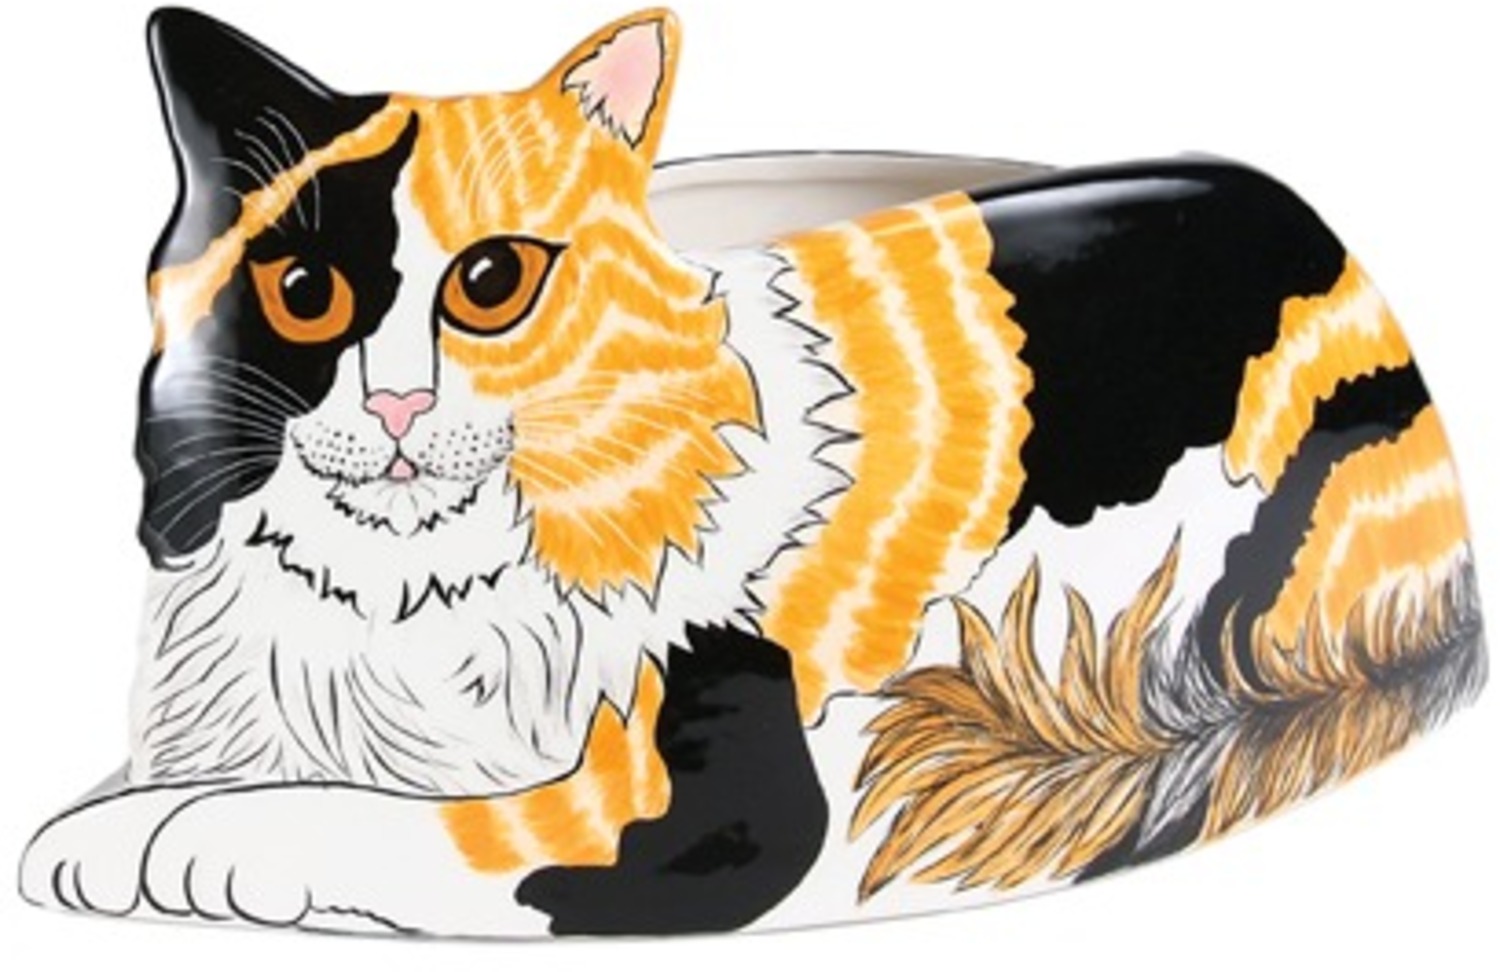 Patches - Calico by Rescue Me Now - Patches - Calico - 6.5" x 12.5" Cat Planter Vase